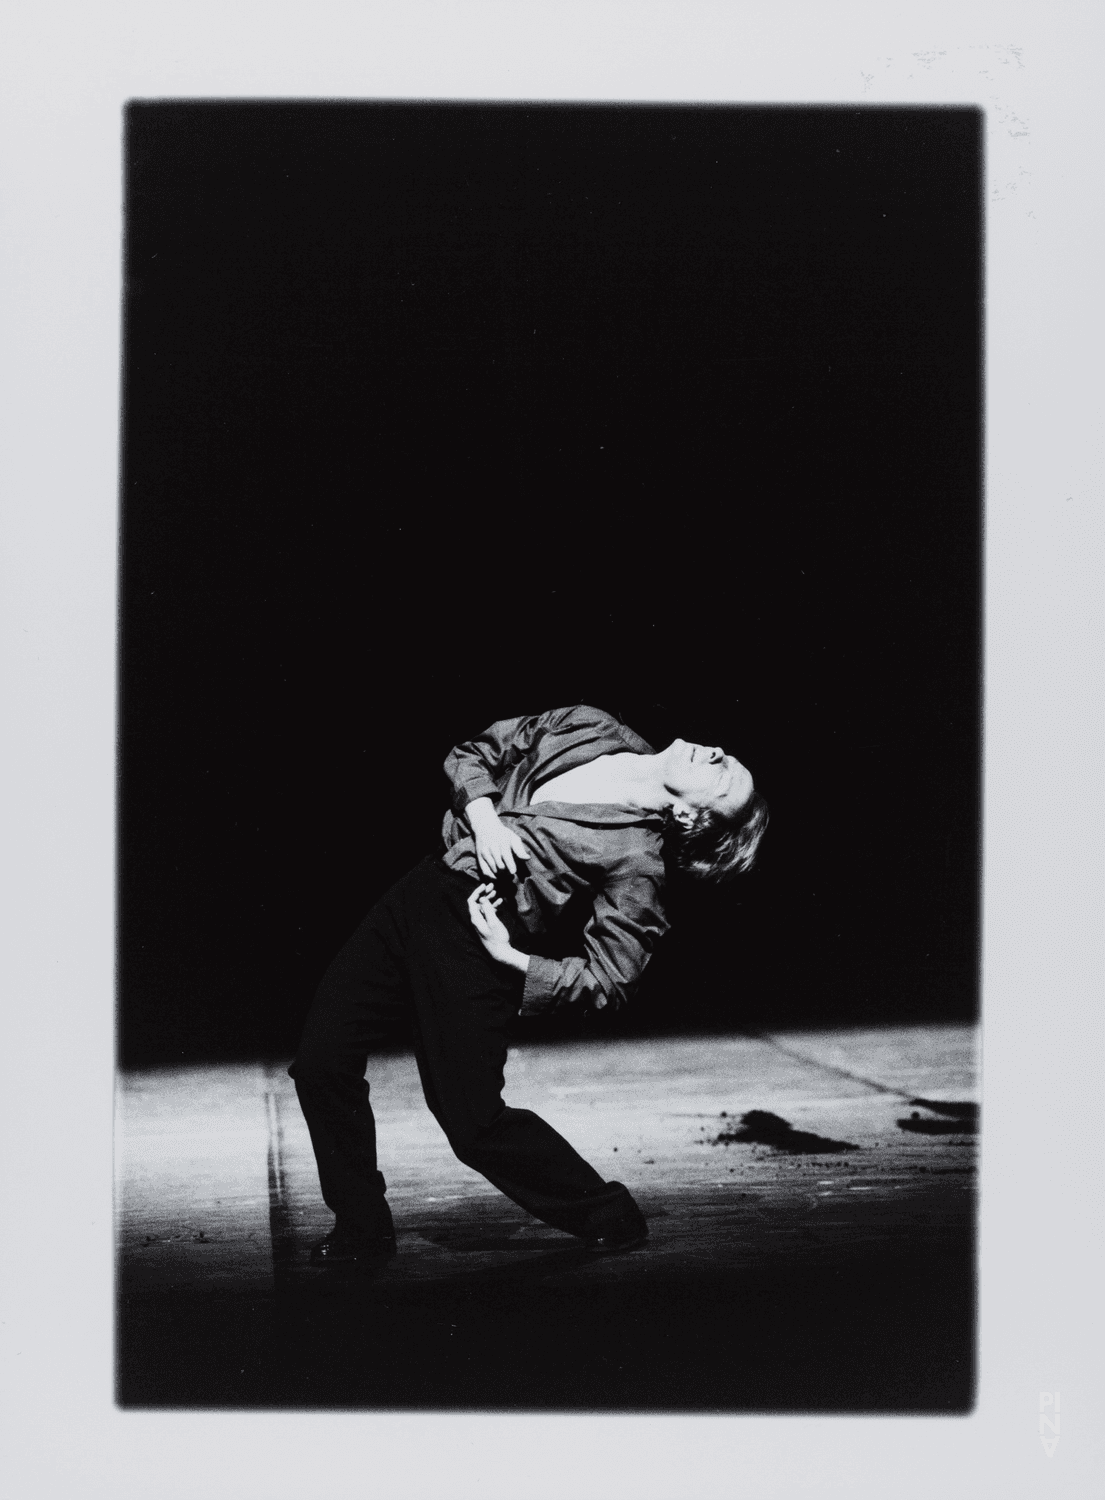 Dominique Mercy in “Danzón” by Pina Bausch